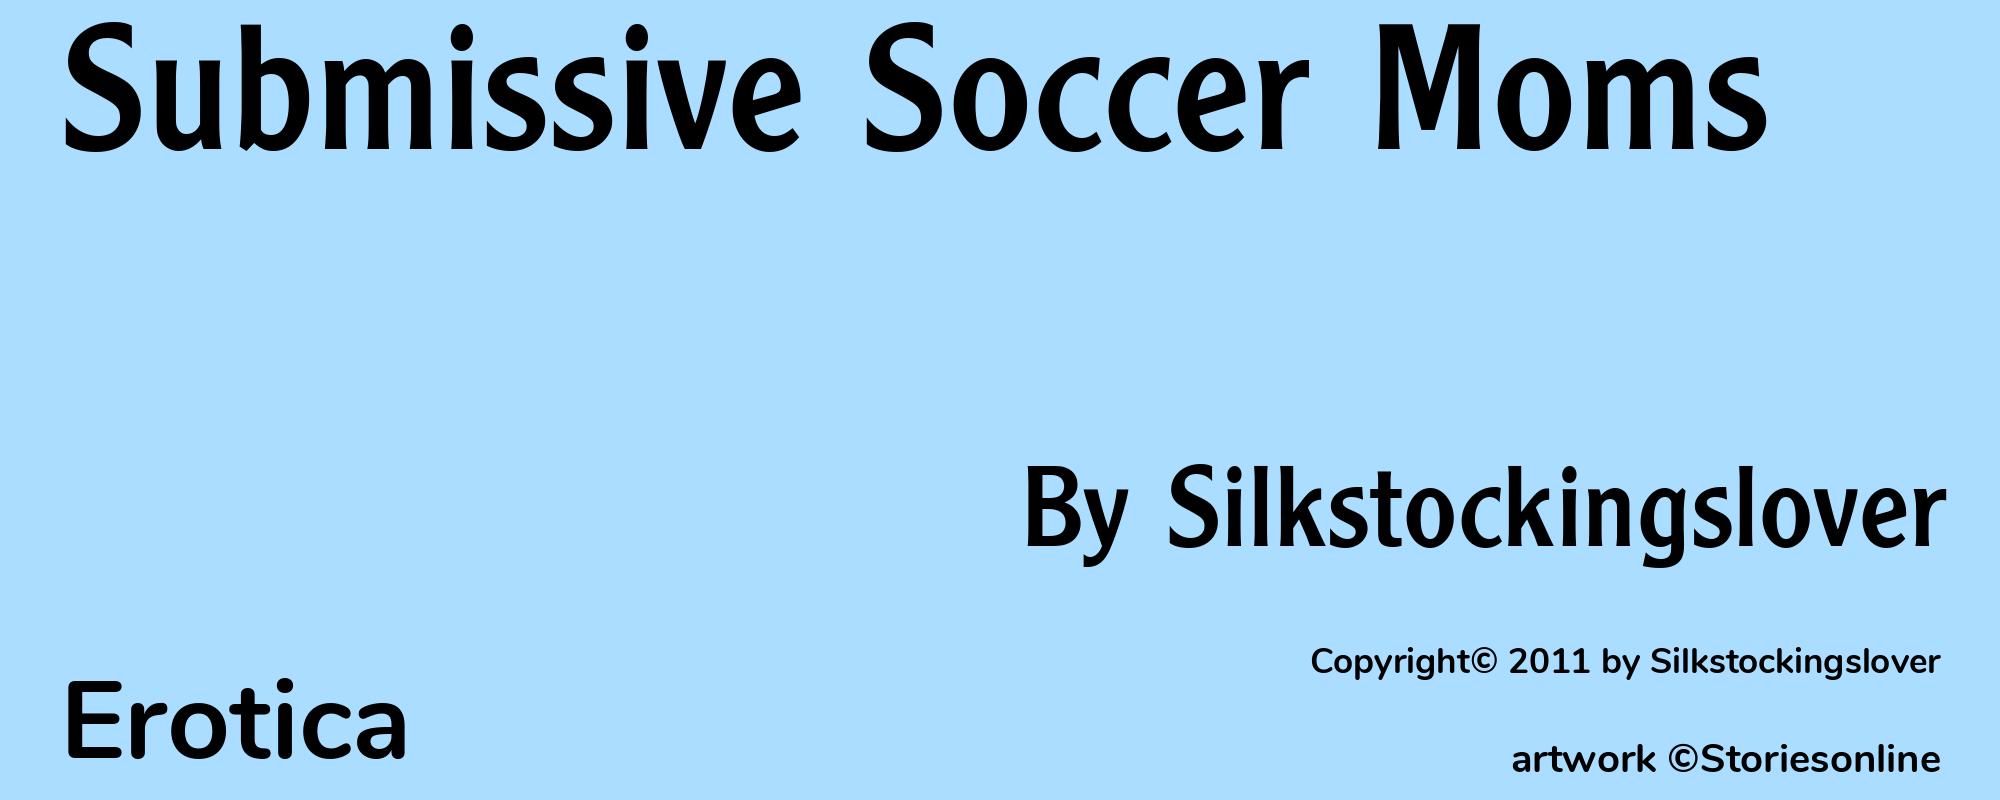 Submissive Soccer Moms - Cover